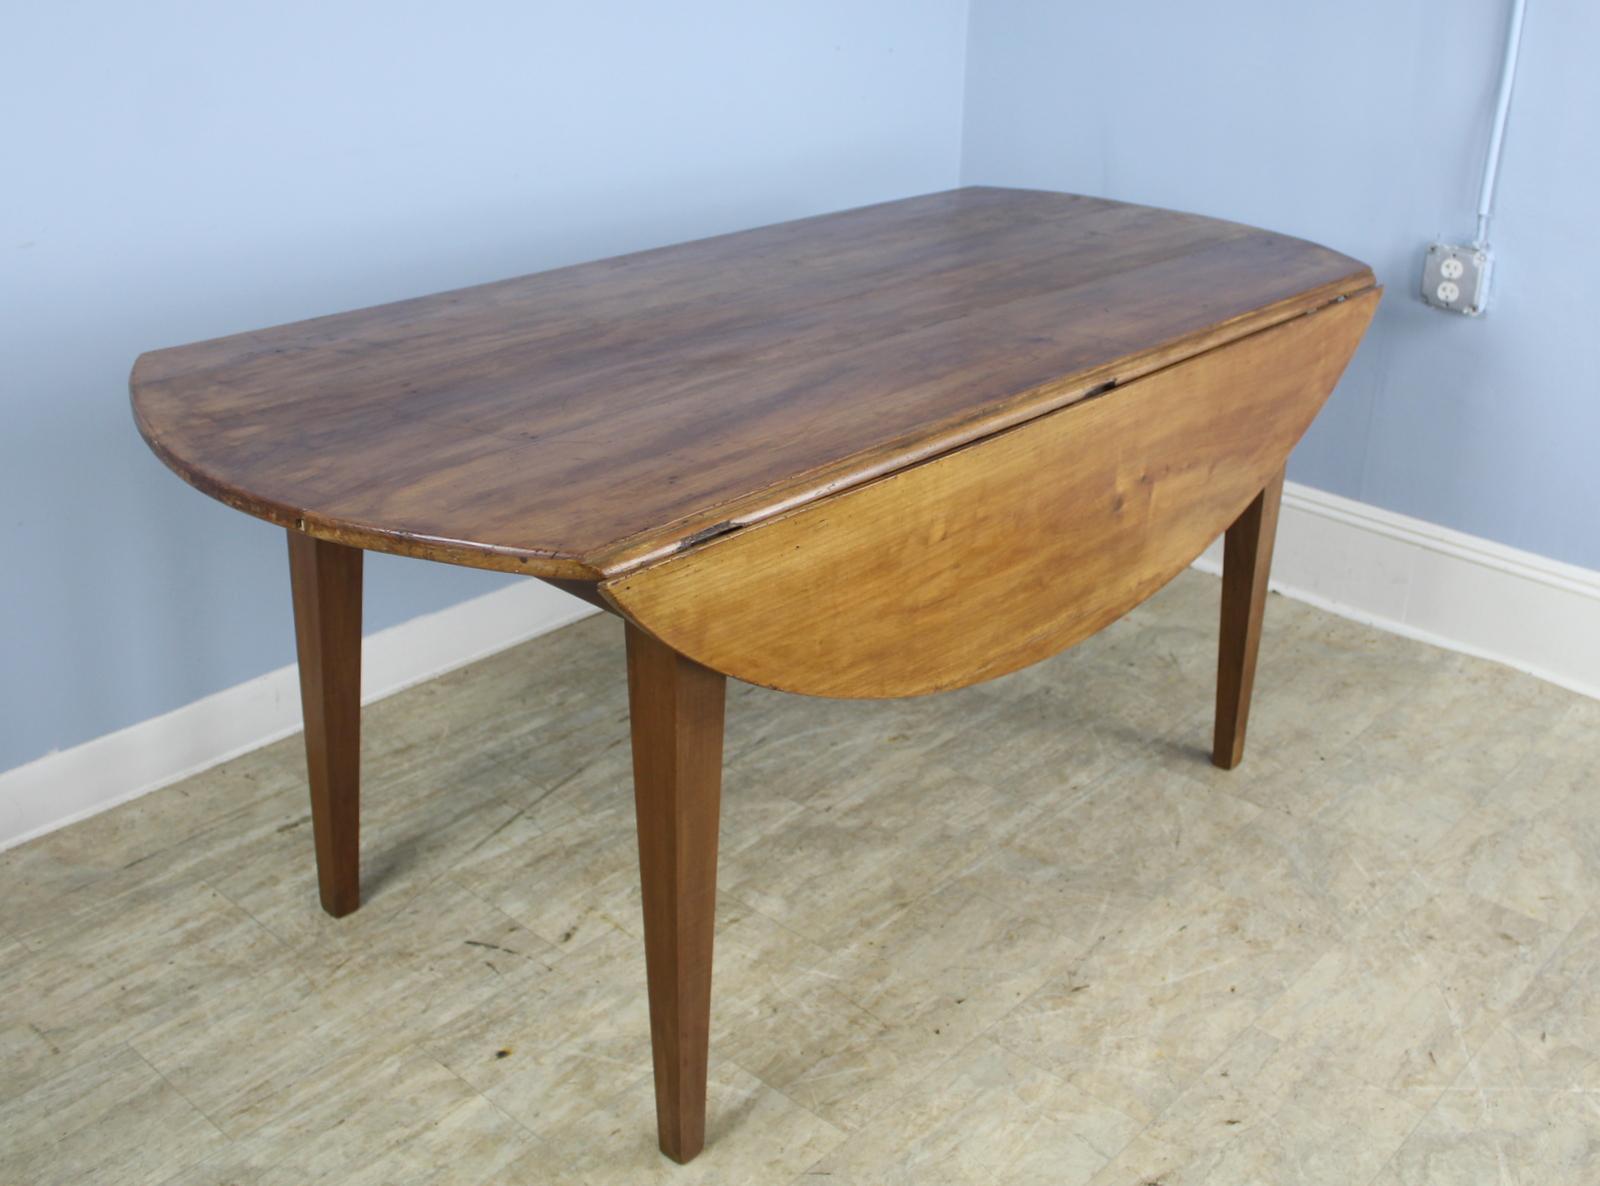 A beautiful warm fruitwood with lovely grain and patina. This oval country farm table has classic tapered legs for a simple and elegant look, and the top has good color. Some early distress on the top and the knuckle which adds lots of character.